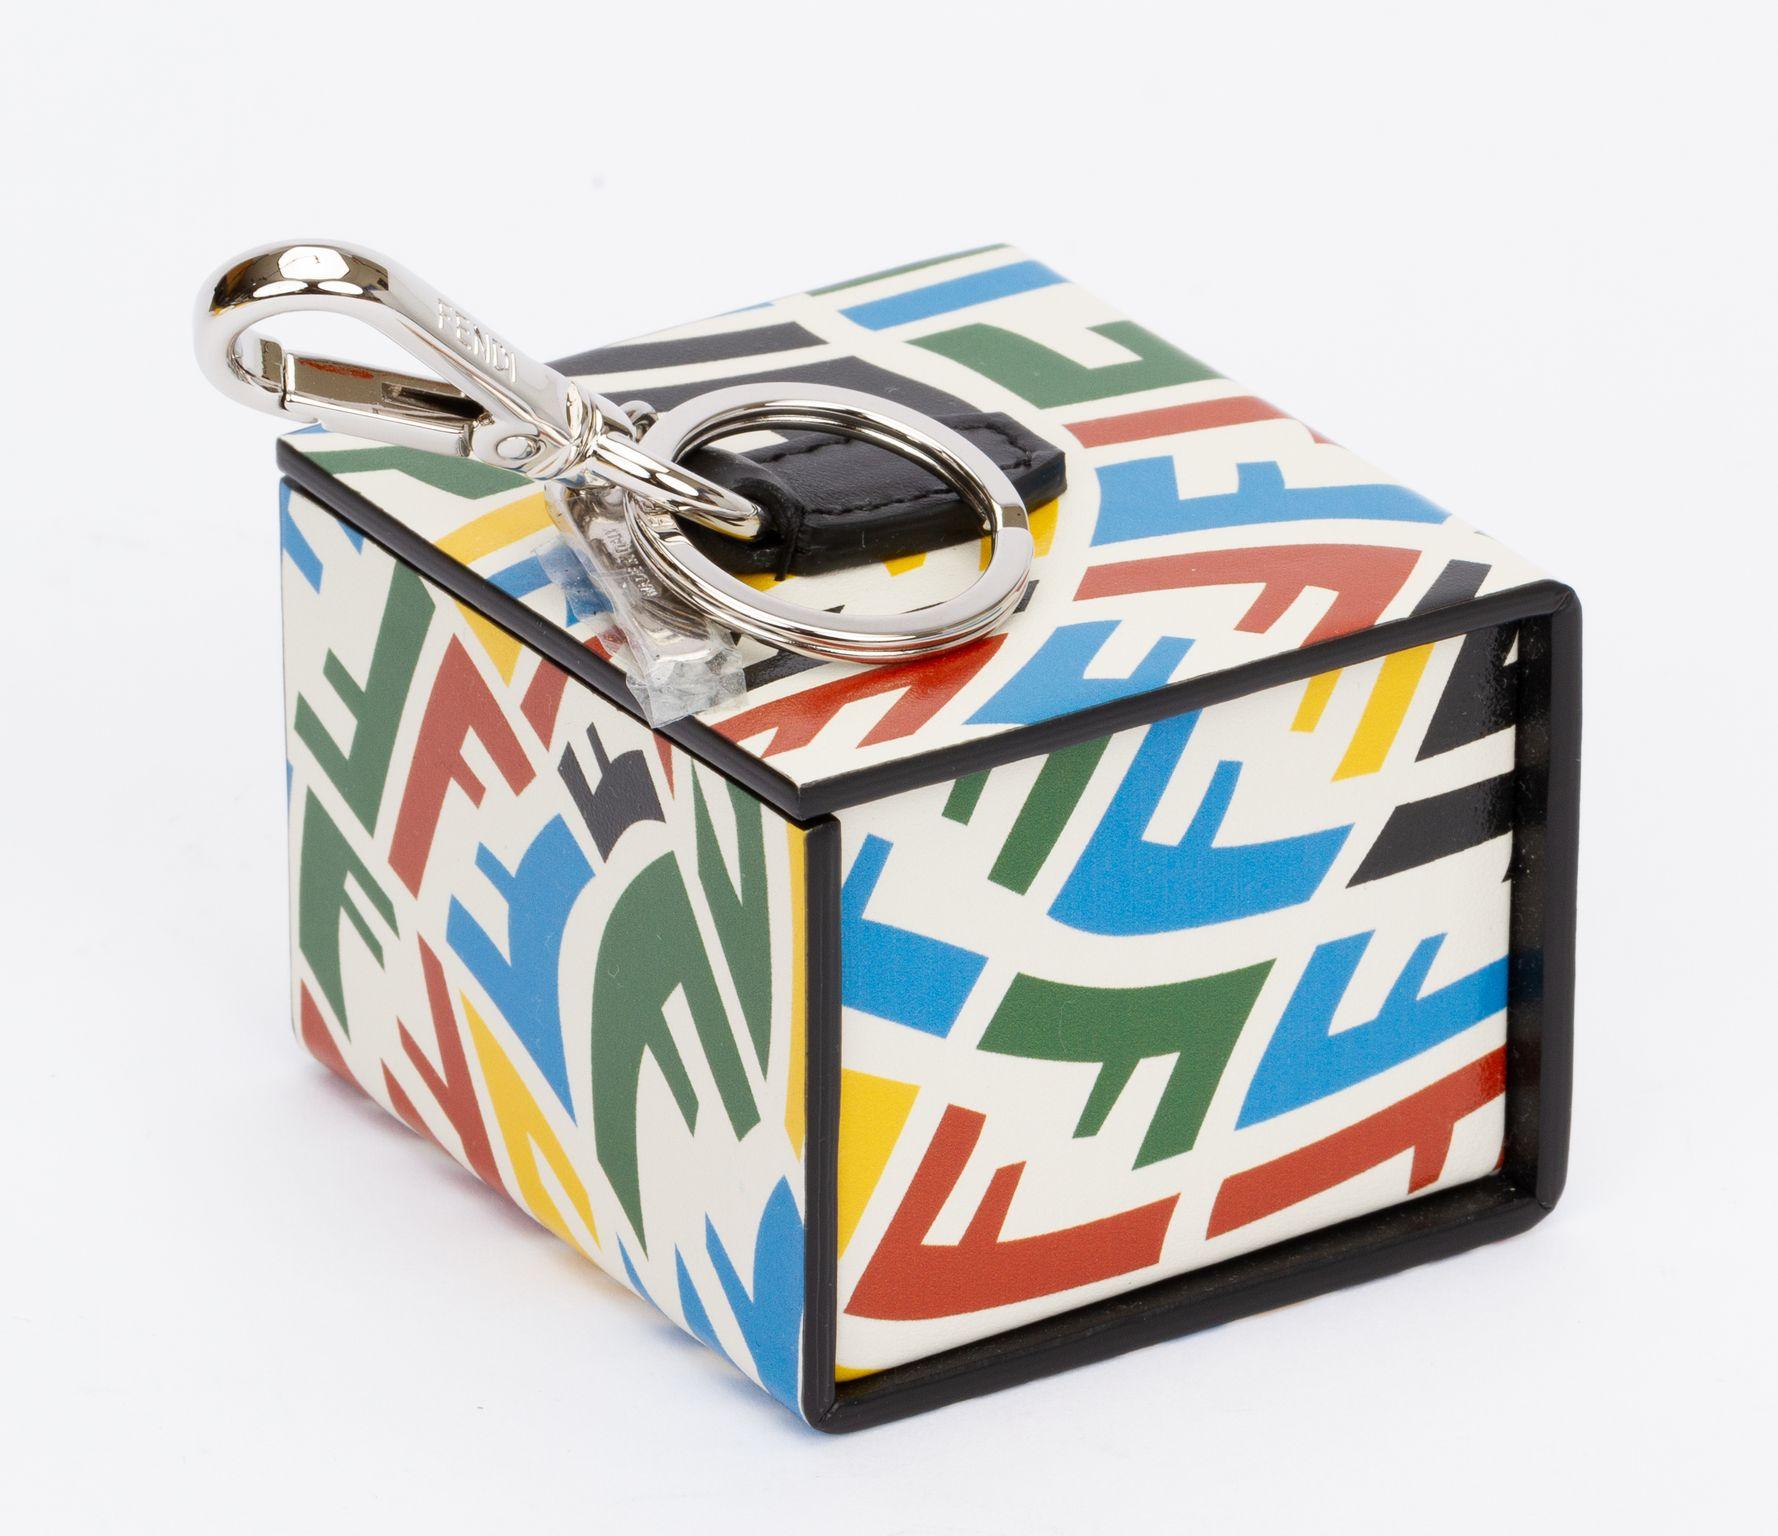 Fendi x Sarah Coleman Vitello FF Vertigo Vertical Box in Multicolor. This bag is made of FF print calfskin leather in multicolor on a white background. The charm features a polished silver hardware so it can be attached to a bigger bag. The magnetic